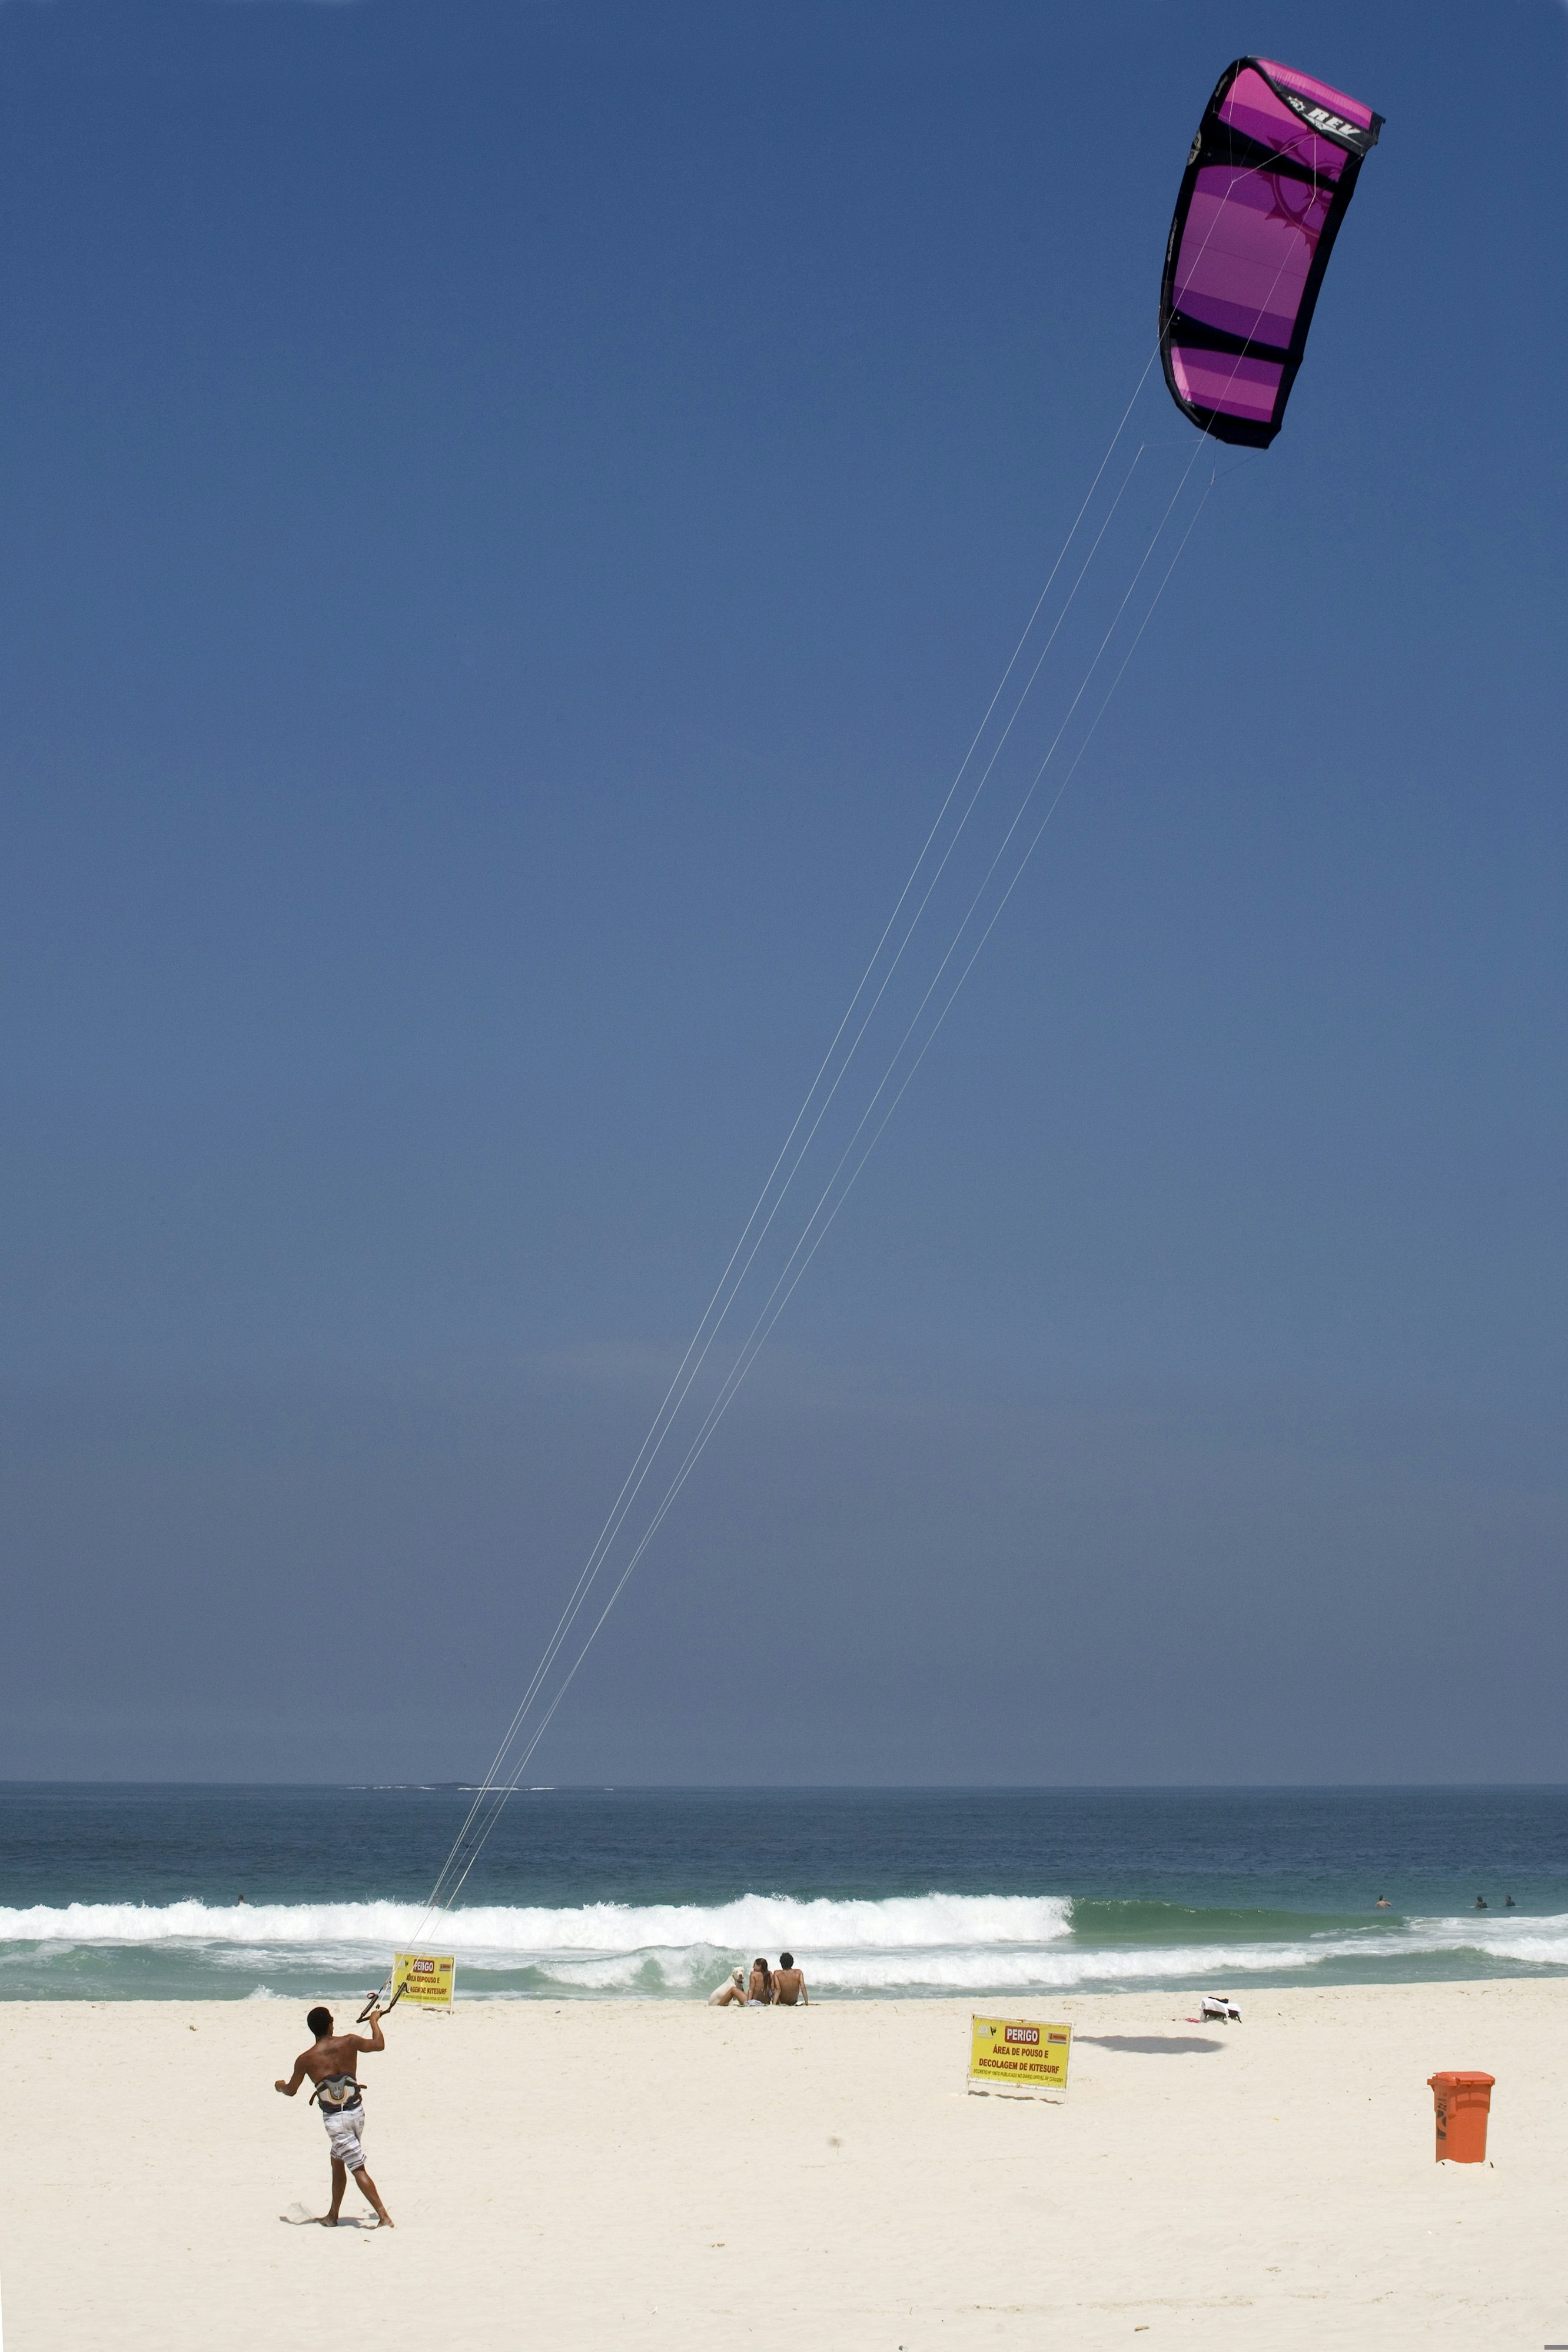 A kitesurfer walks along the sand at Barra da Tijuca beac with his purple kite flying high above; a couple of other beach-goers sit in the sand.